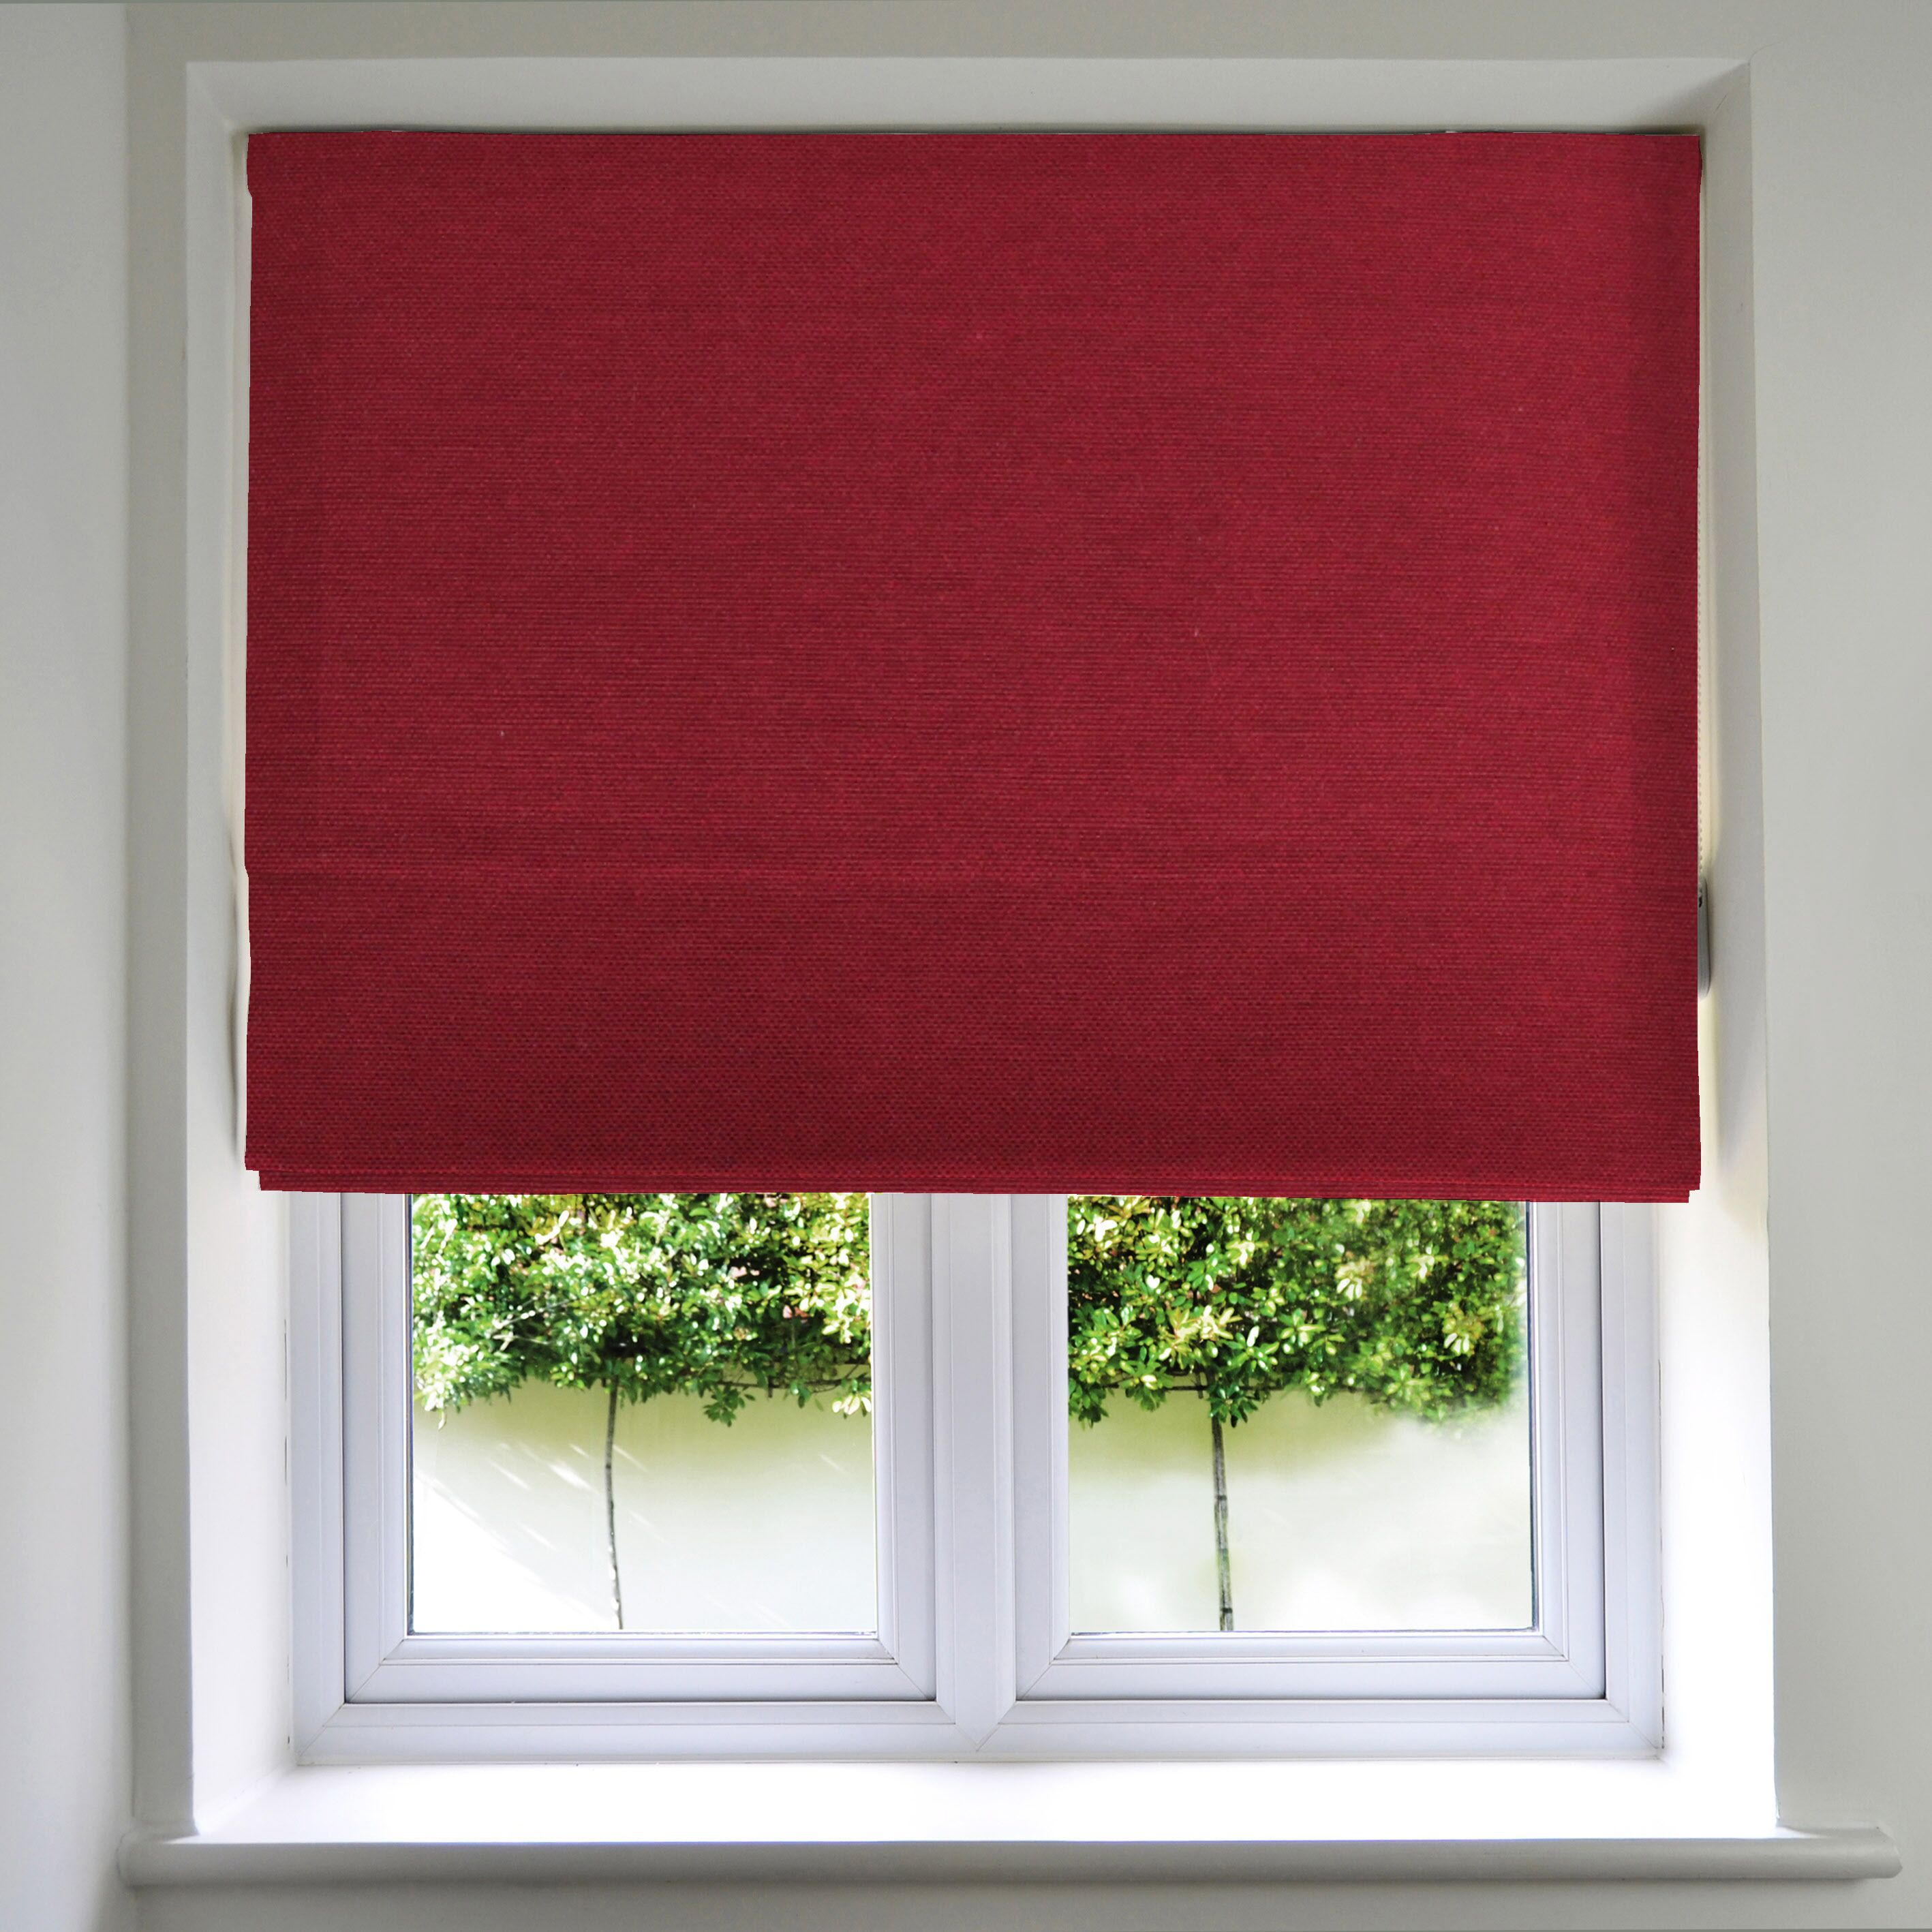 McAlister Textiles Panama Red Roman Blind Roman Blinds Standard Lining 130cm x 200cm Red